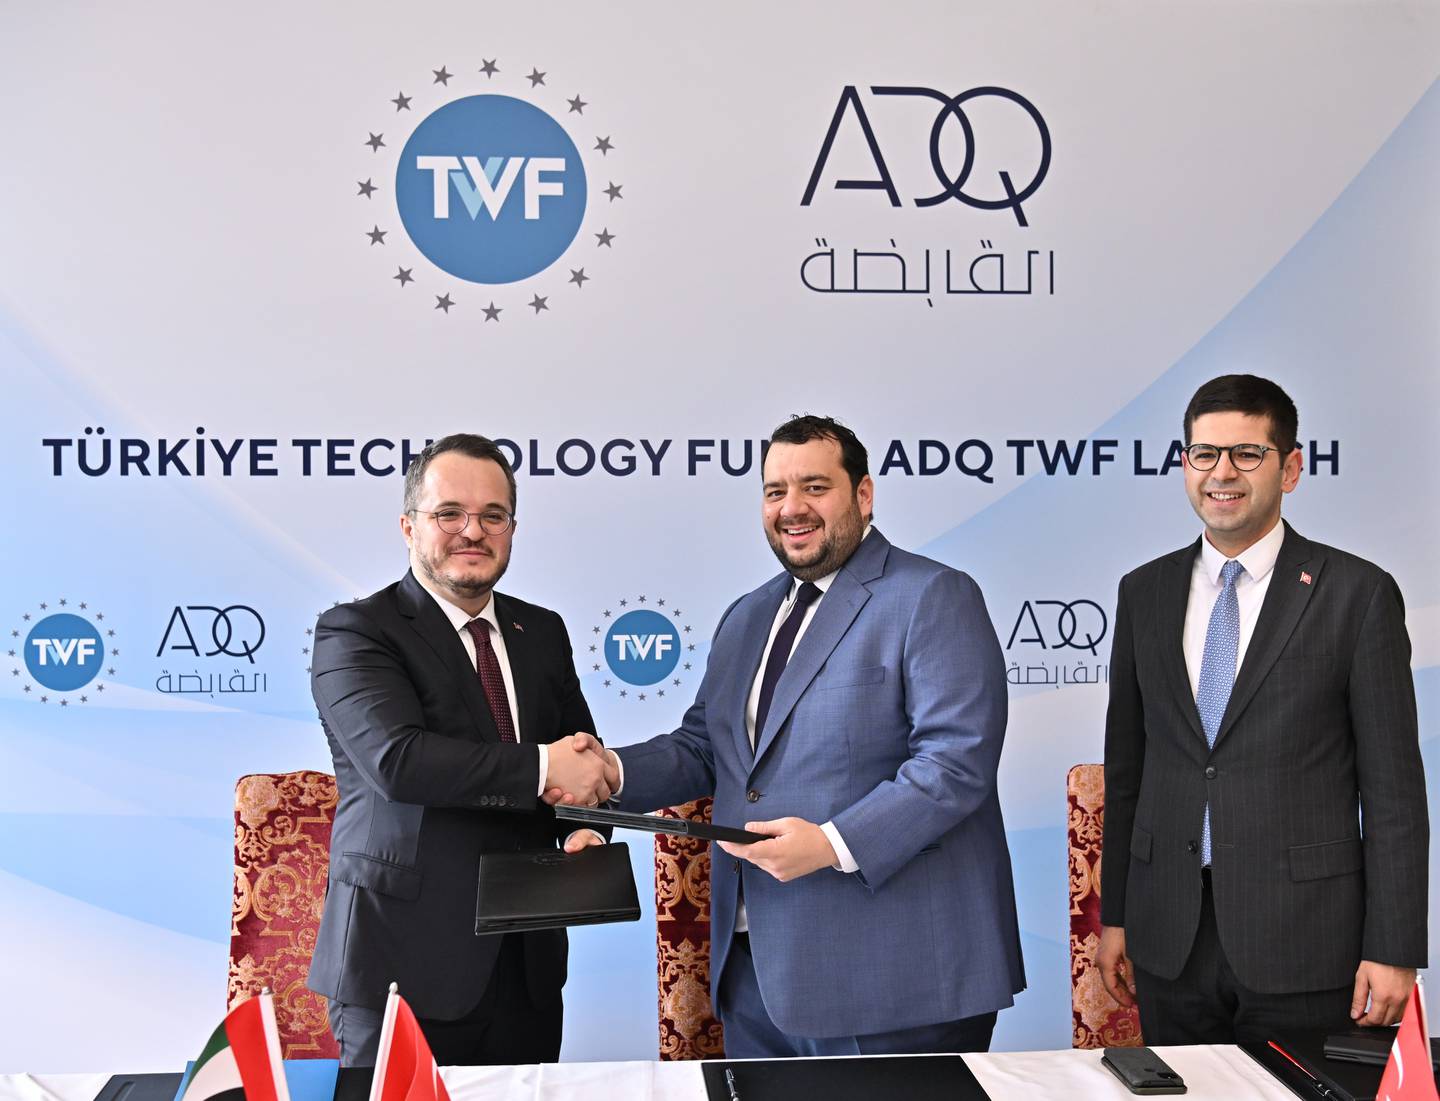 ADQ TWF was launched by Mohamed Alsuwaidi, managing director and chief executive of ADQ, and Arda Ermut, chief executive and board member of TWF. Photo: TWF